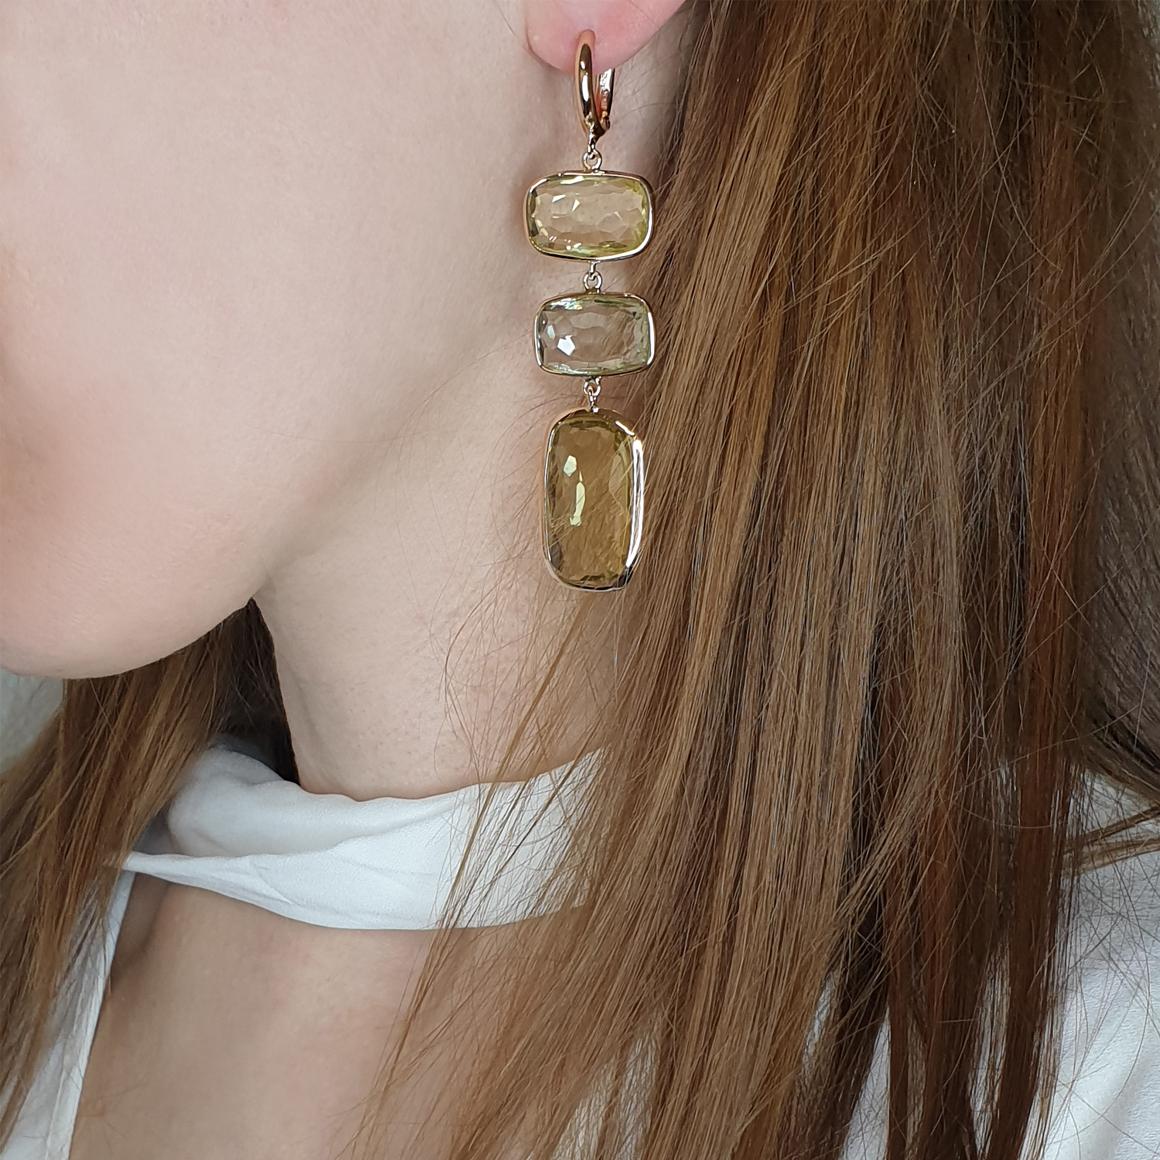 Fashion earrings nice design. We love to transfer our passion to make you happy! 
Made in Italy by Stanoppi Jewellery since 1948.
Earrings in 18k rose gold with Lemon Quartz (rectangular cut, size: 10x16mm) and Prasiolite (rectangural cut,